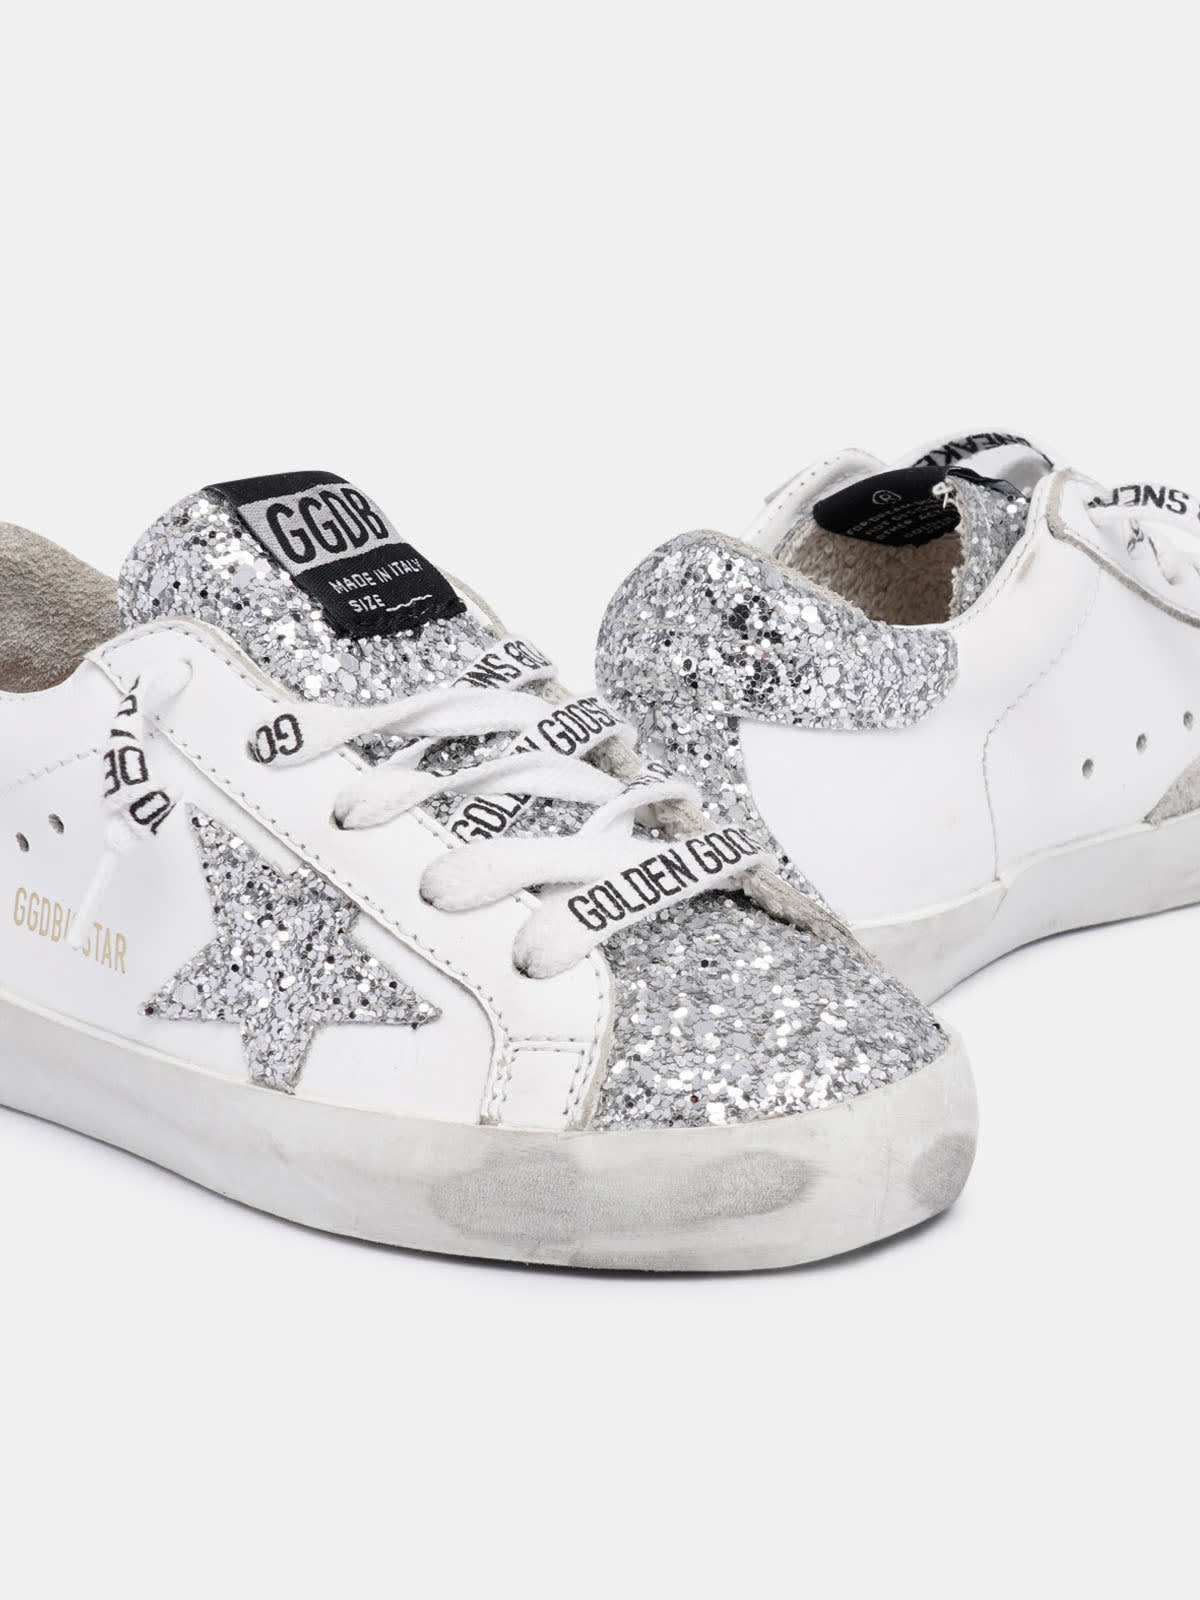 Super-Star sneakers with silver glitter tongue, star and heel tab | Golden  Goose